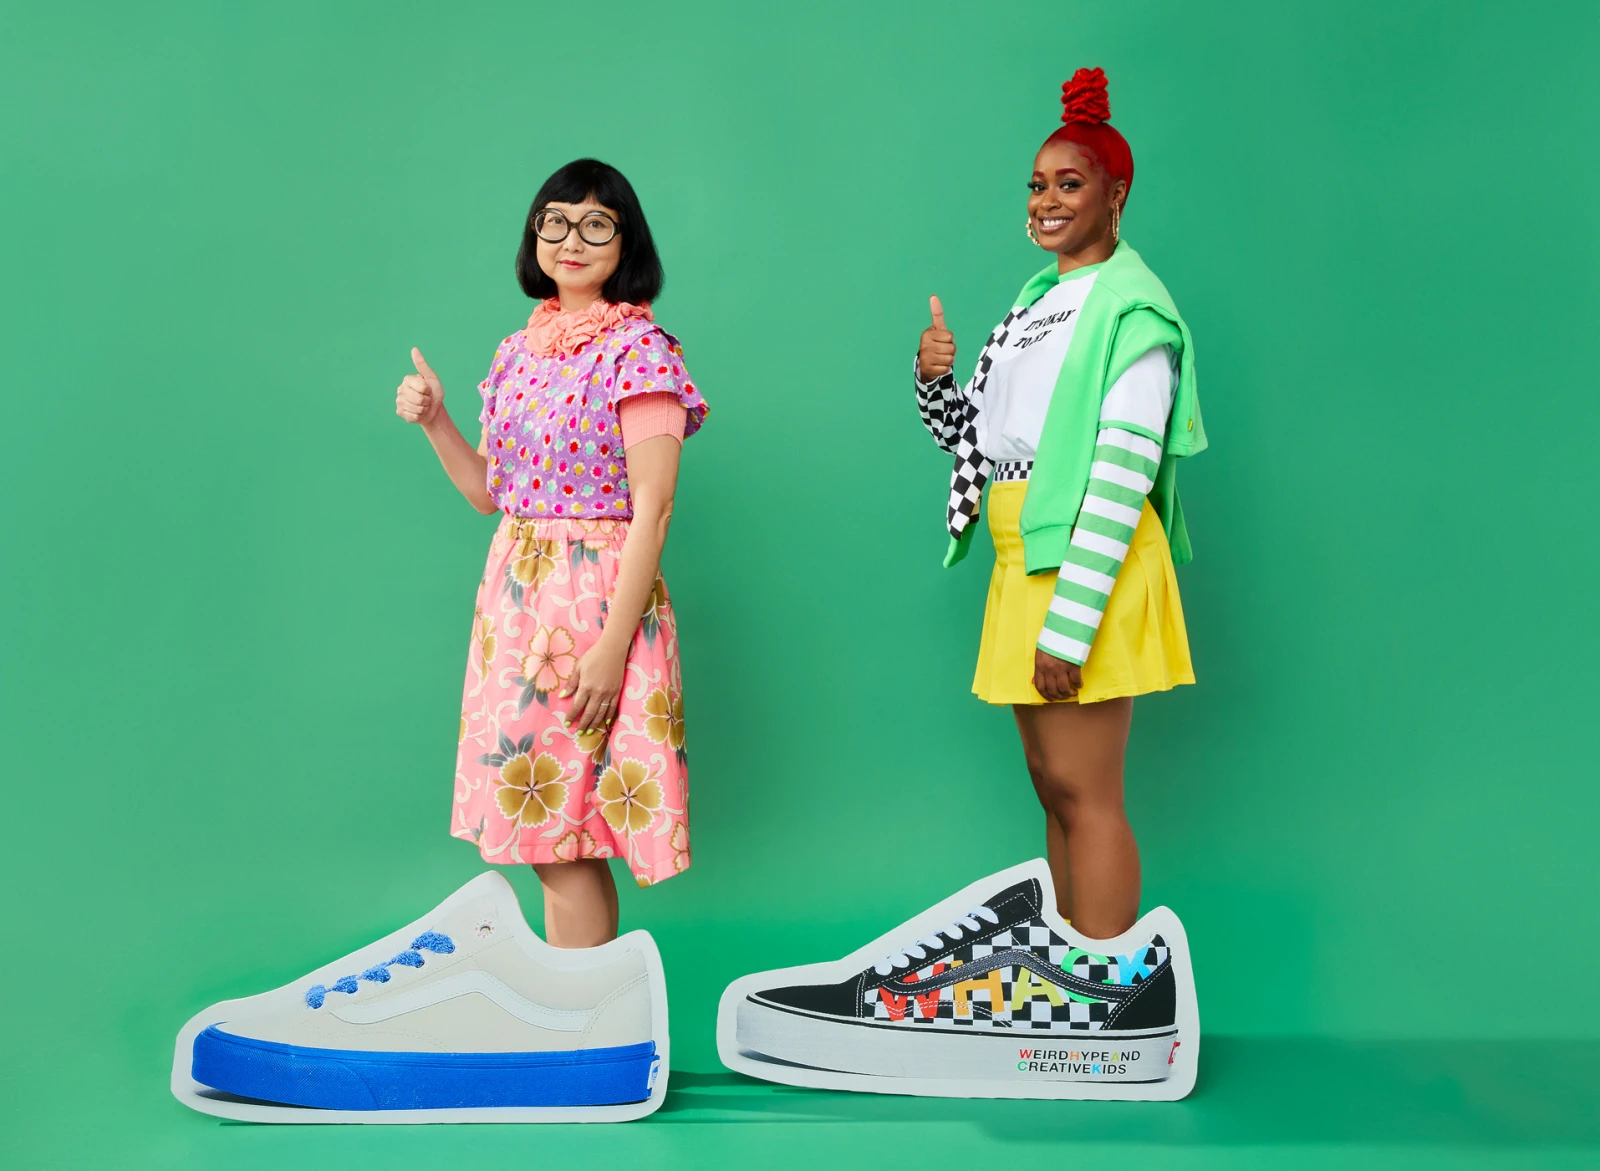 Tierra Whack Vans Collection taka Date